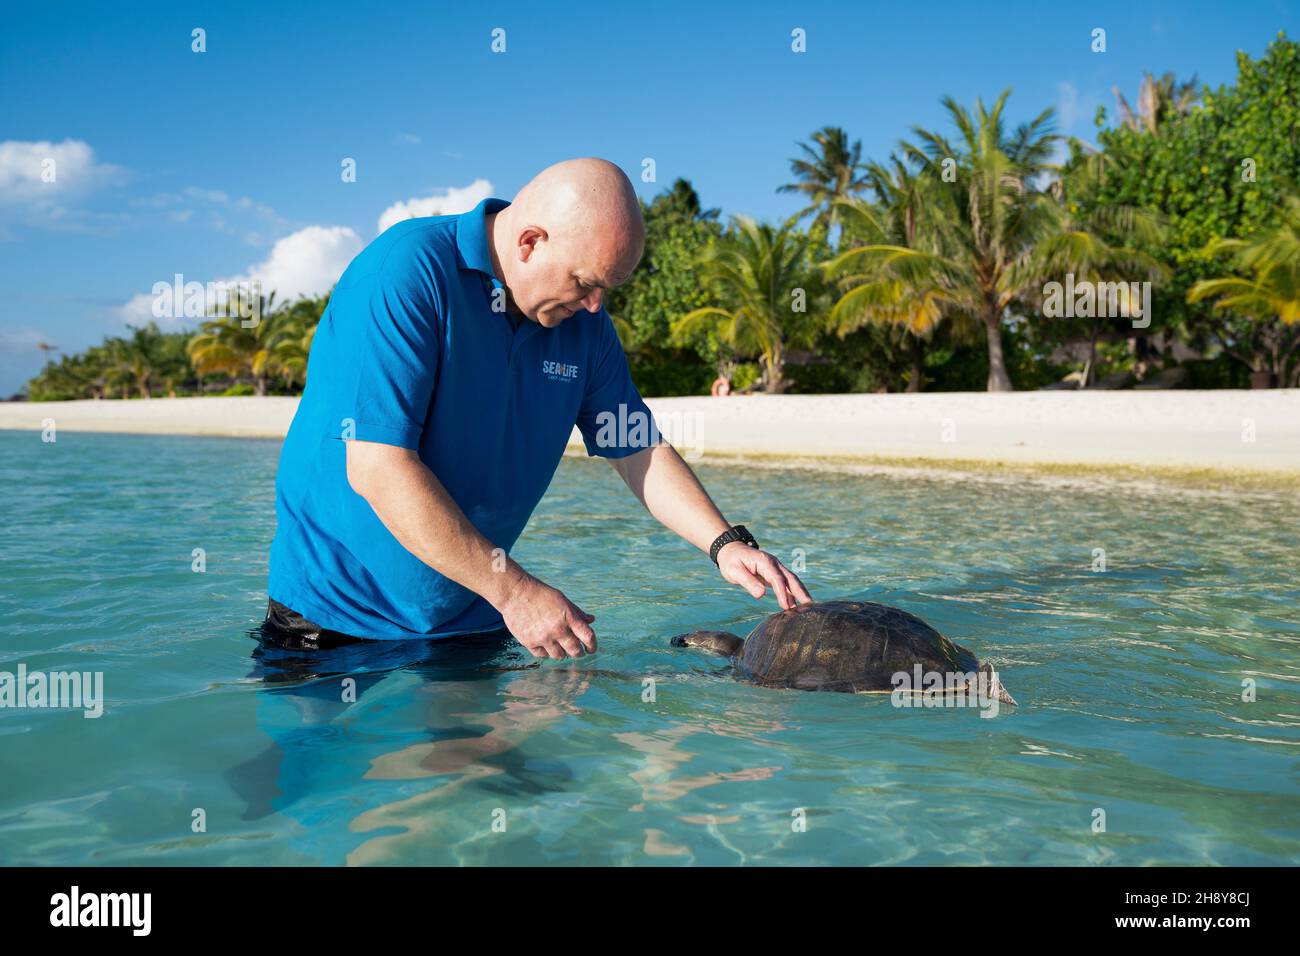 Sea Life Animal Care Curator Mark Hind supervises April, an olive ridley sea turtle, as she enjoys a swim in the sea as a part of her enrichment, at the Turtle Rehabilitation Centre at Four Seasons Resort at Kuda Huraa, Maldives. Picture date: November 17, 2021. See PA story ENVIRONMENT Turtle Maldives. April, who has been relocated to her new home at Sea Life Loch Lomond, was found floating on the ocean surface in Raa Atoll in the Maldives, entangled in a discarded fishing net with her front right flipper missing and a plastic bag around her neck. She is unable to dive due to issues with buoy Stock Photo